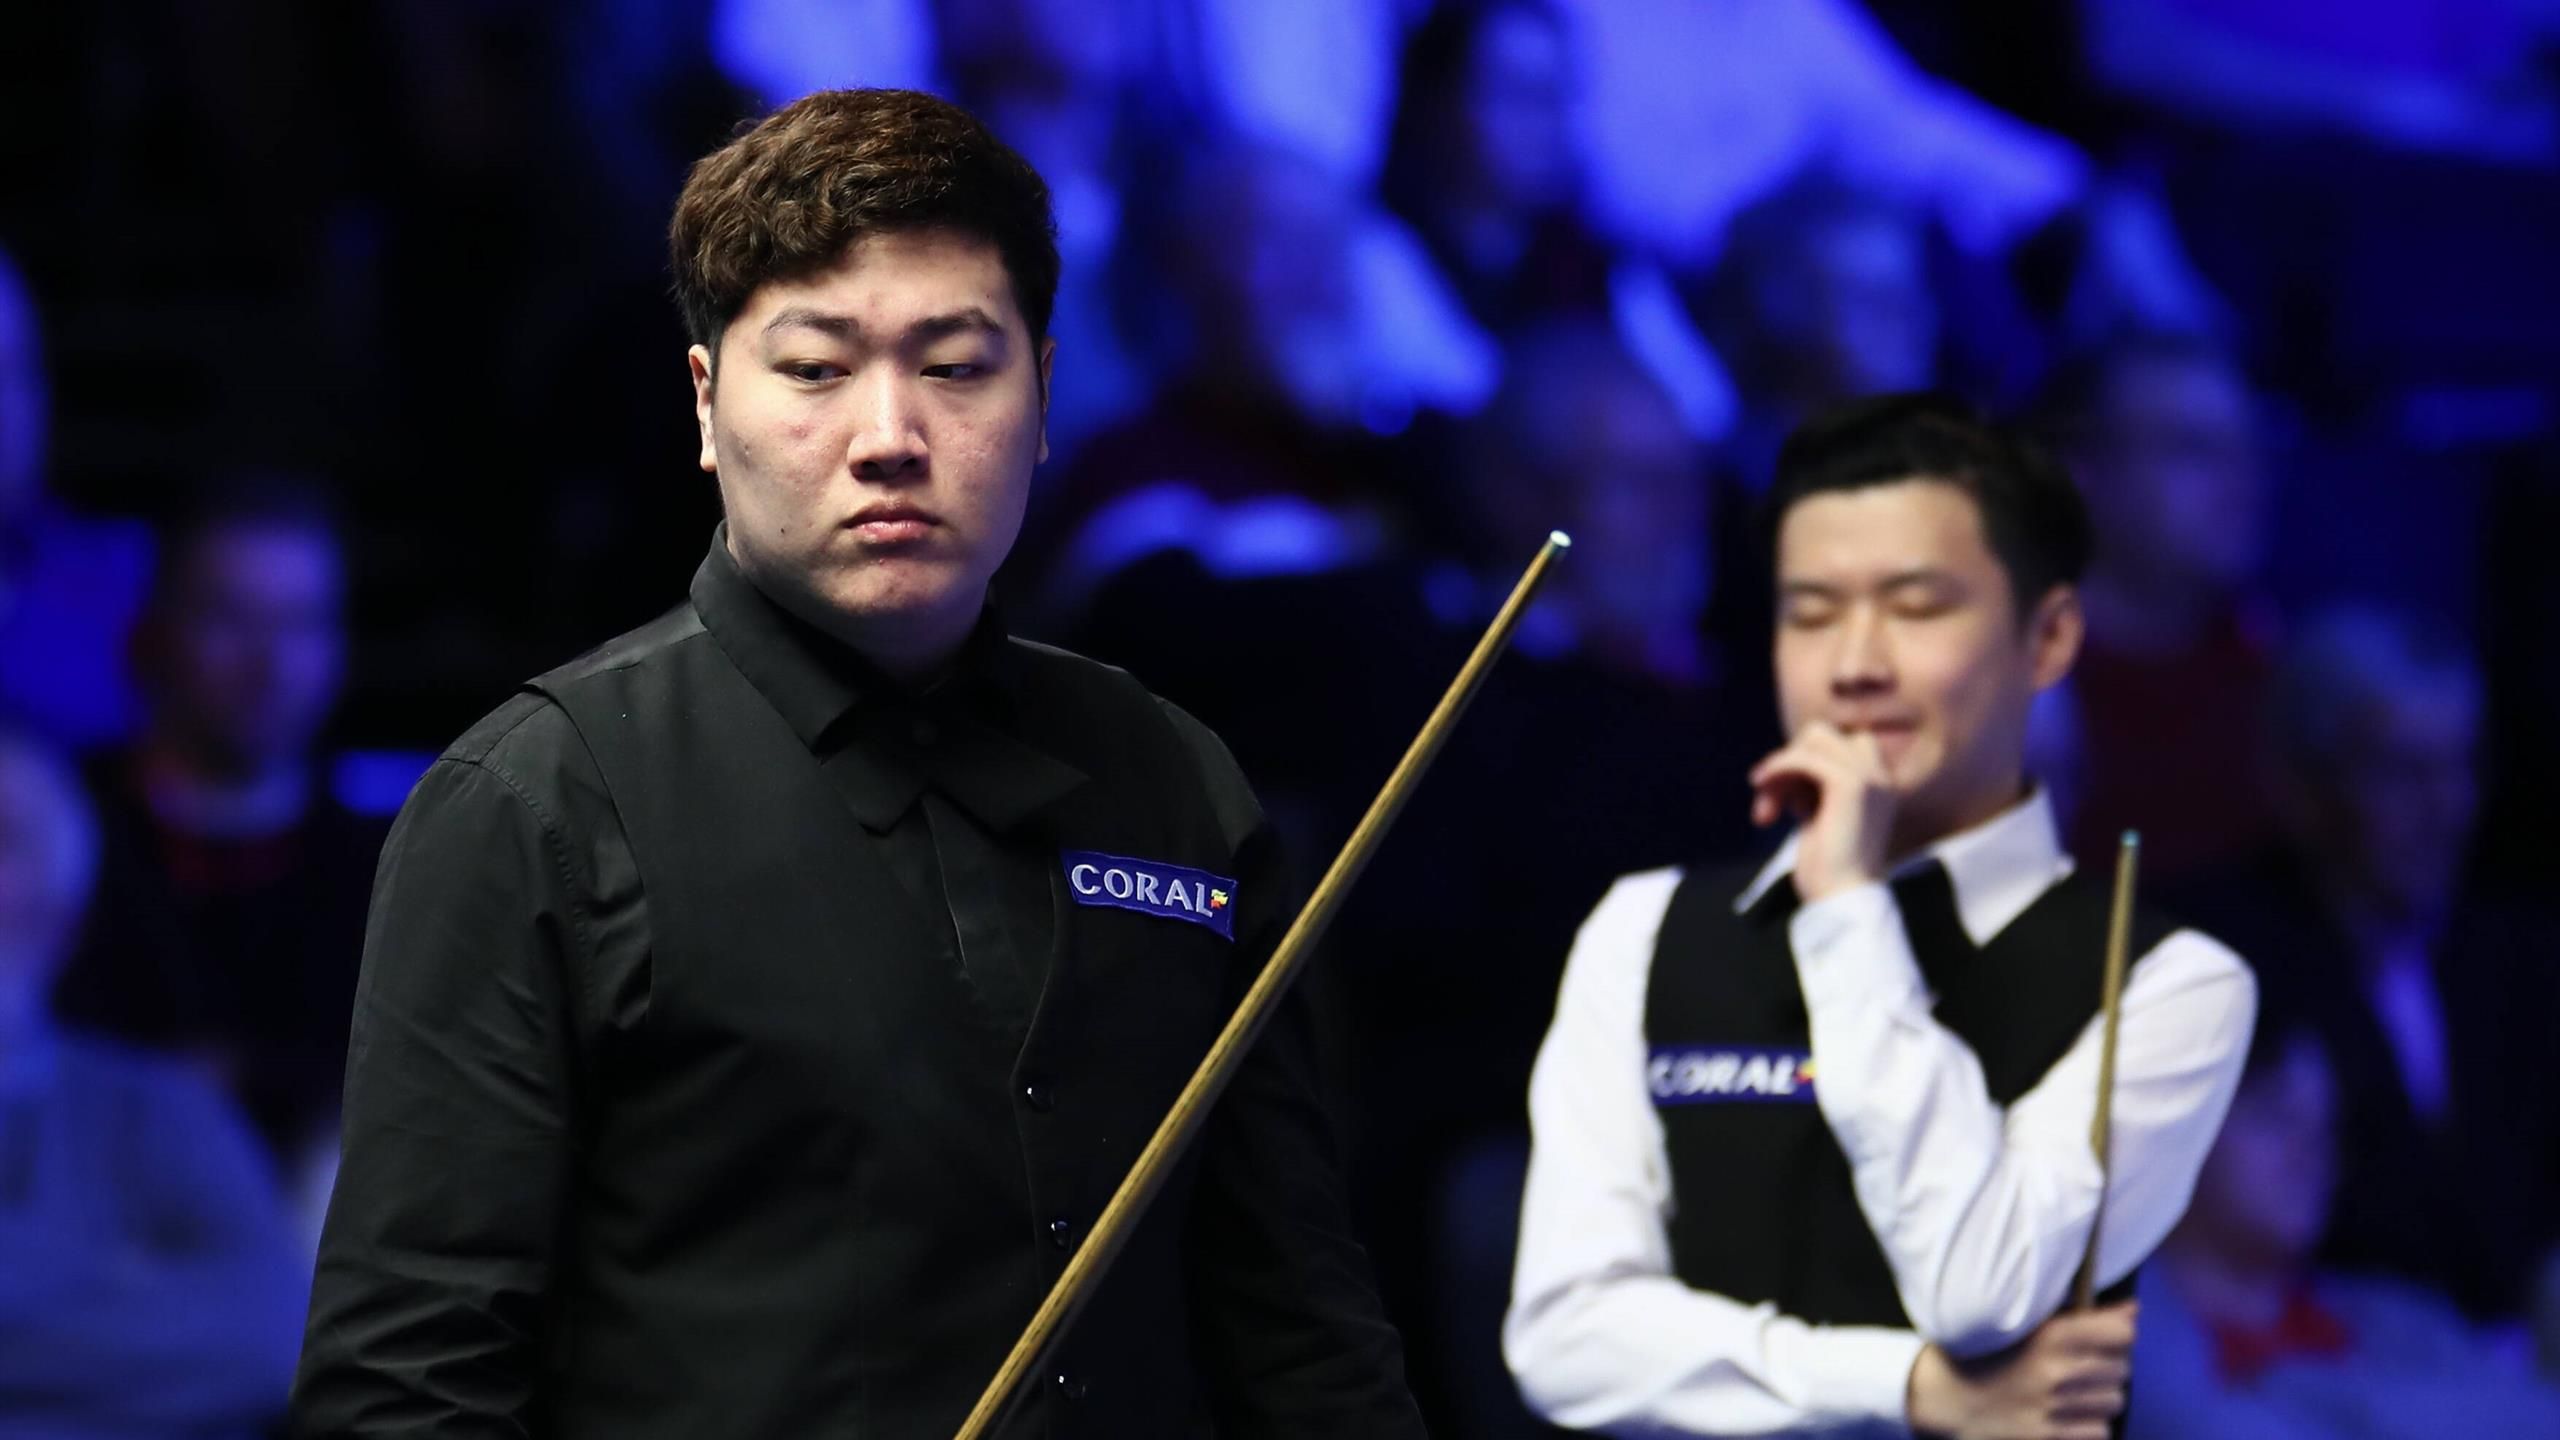 Zhao Xintong and Yan Bingtao among 10 players charged in snookers match-fixing probe, the WPBSA announces